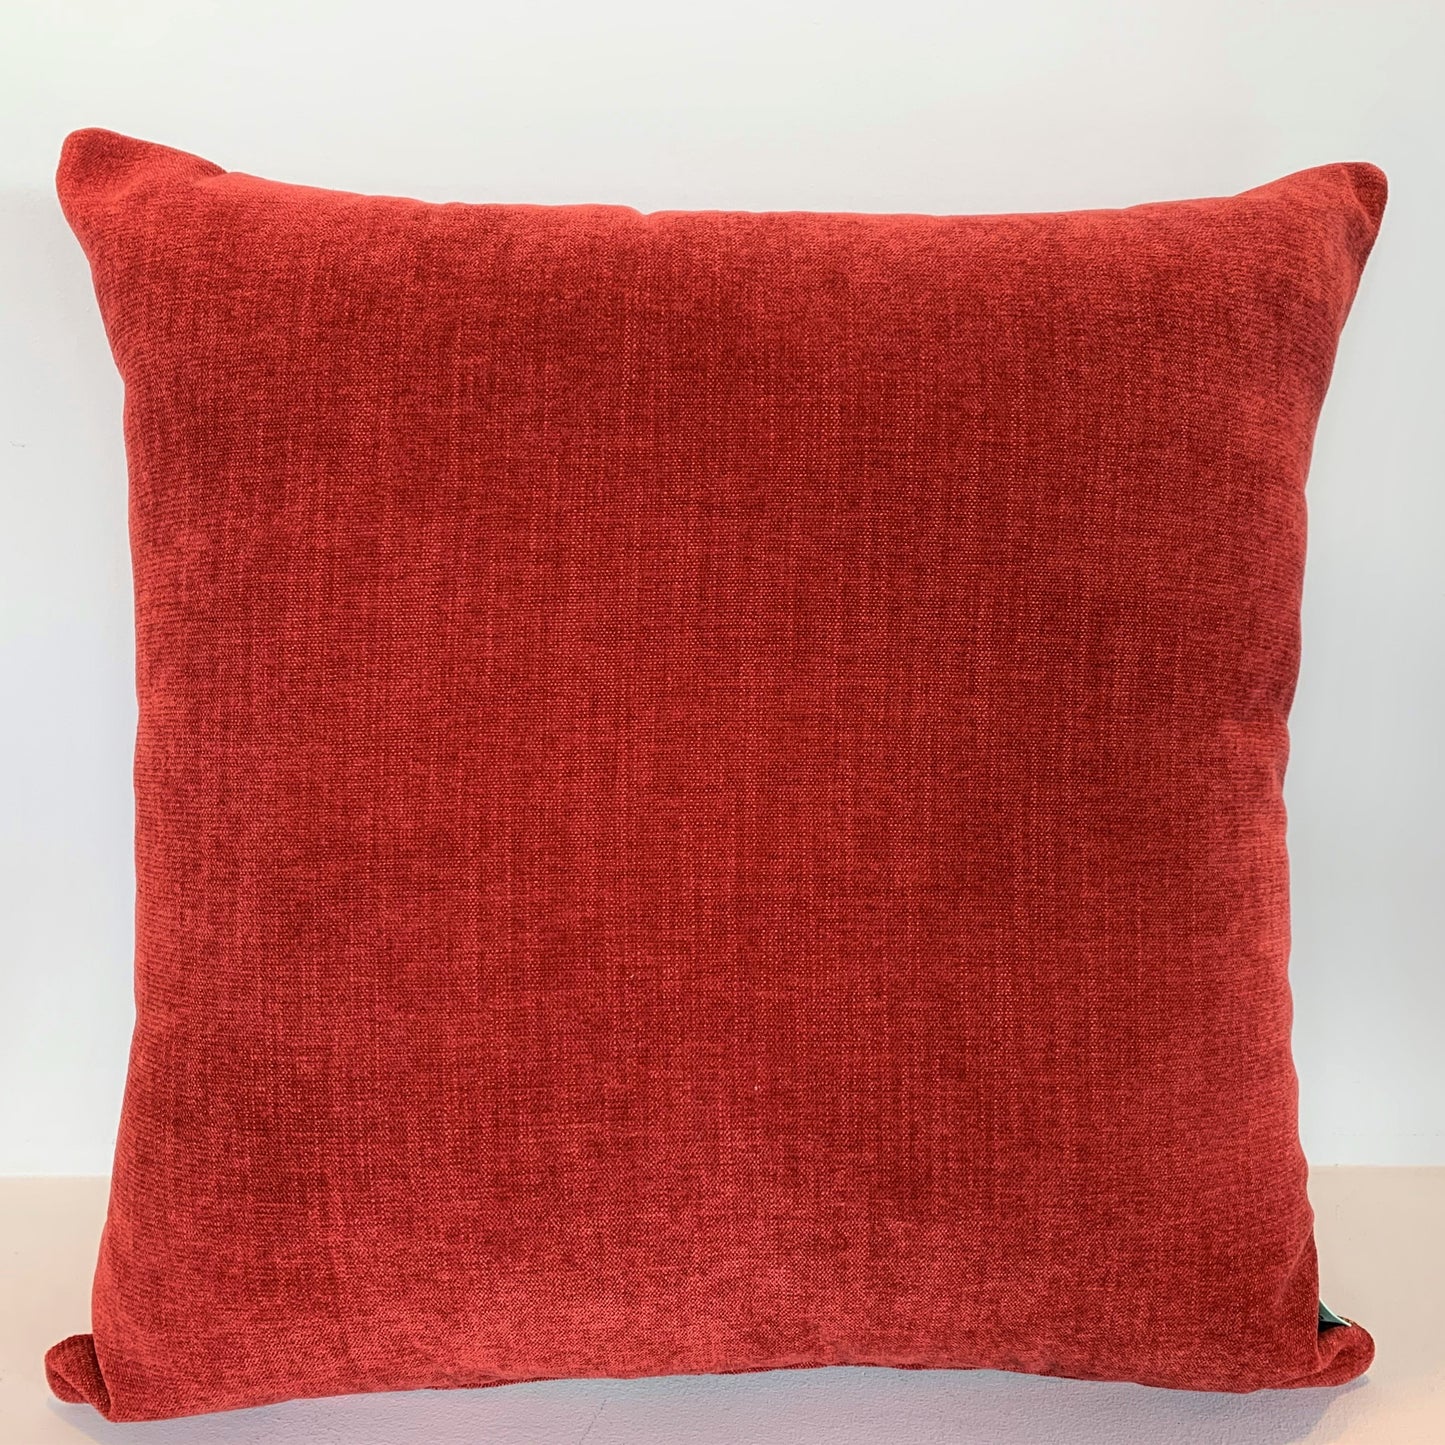 Red Abstract Floral - Cushion Cover - 48cm x 48cm